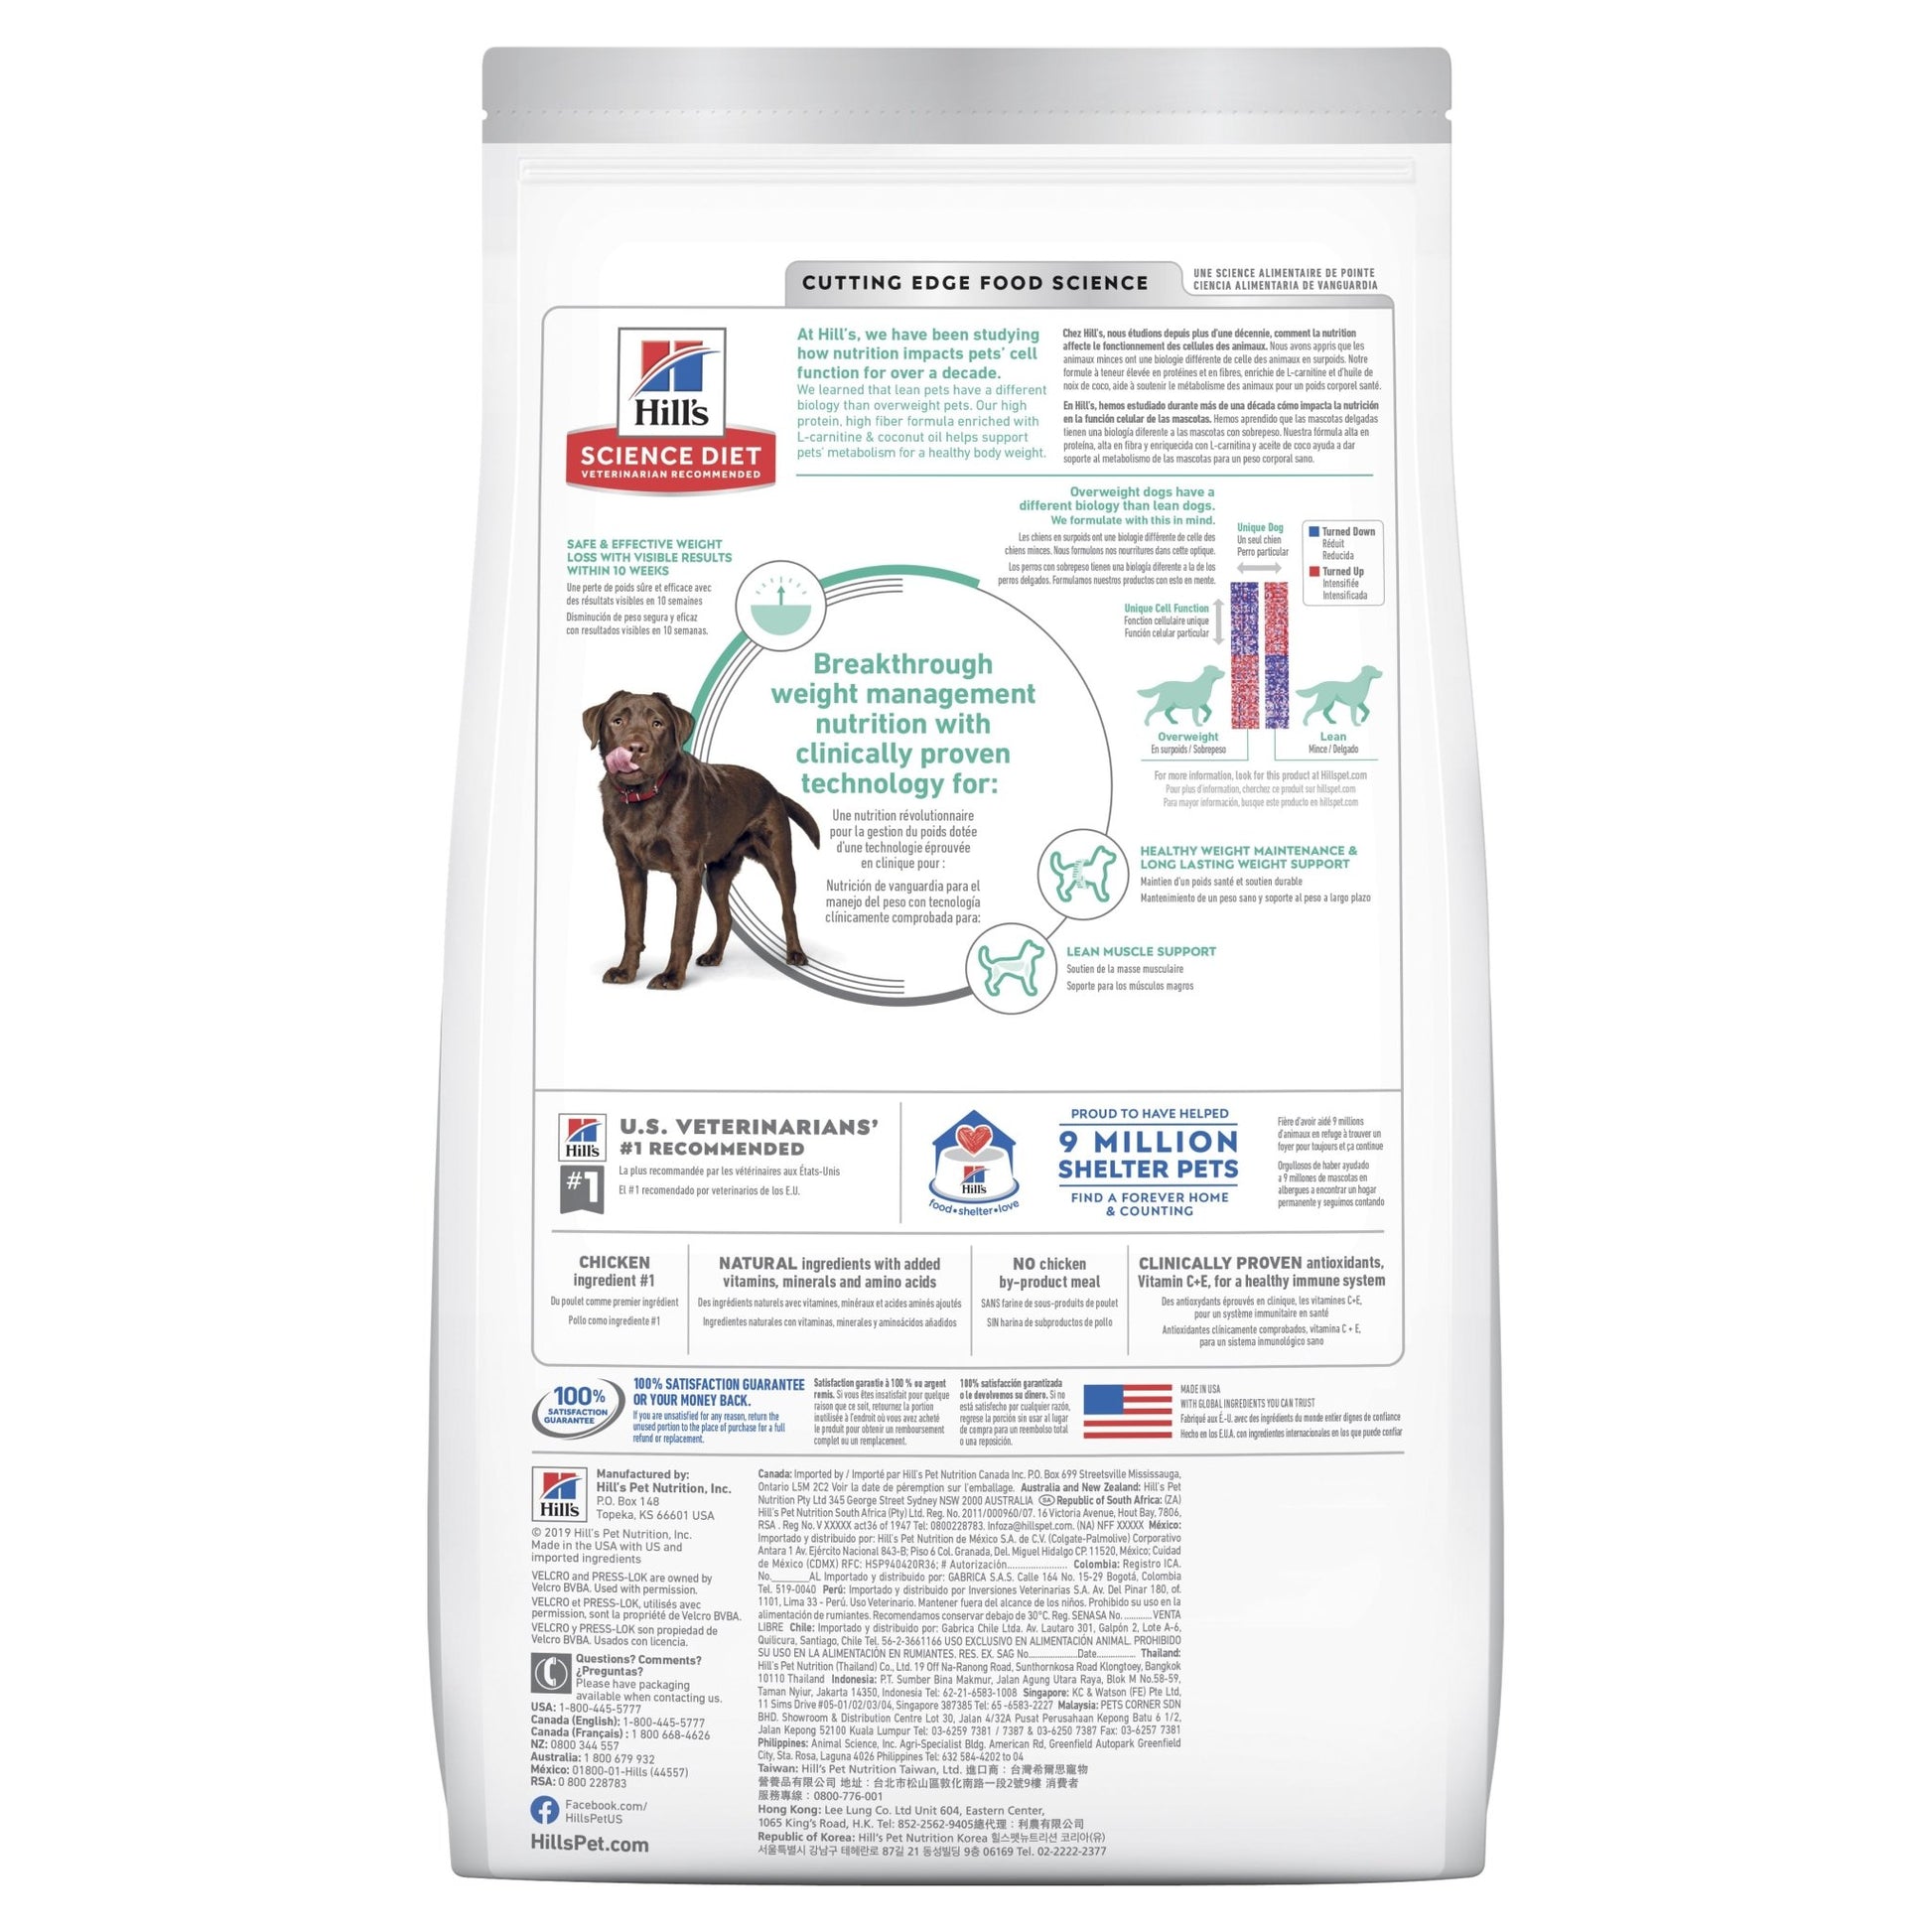 Hill's Science Diet Perfect Weight Large Breed Adult Dry Dog Food, 12.9kg - Woonona Petfood & Produce